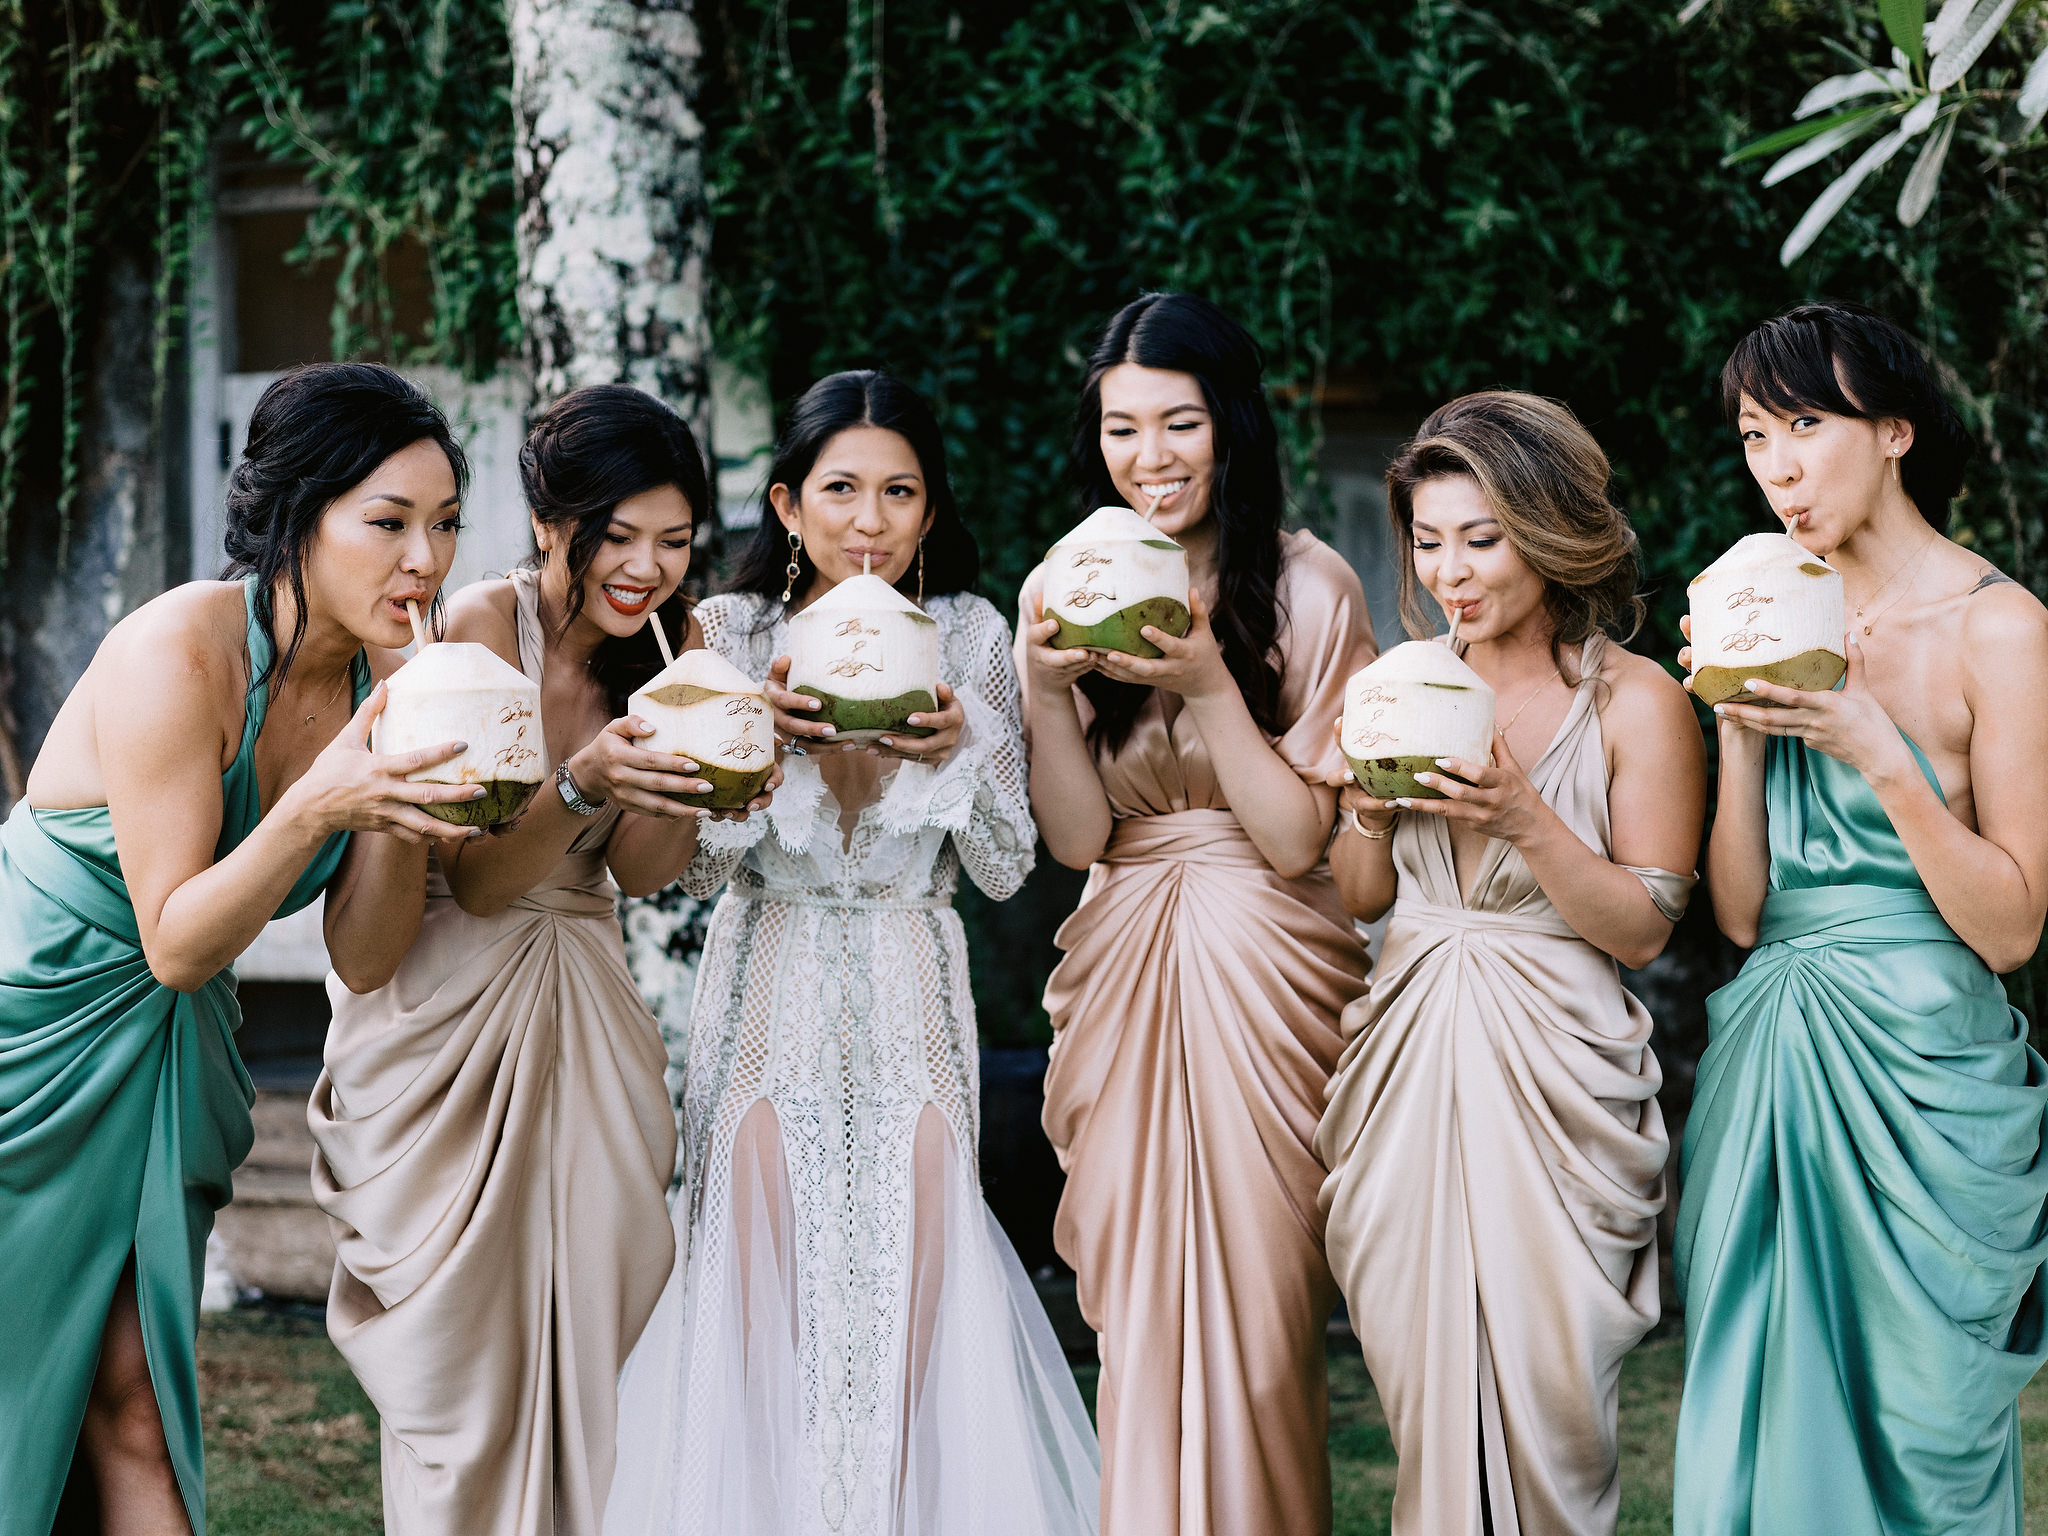 The bride and bridesmaids are drinking coconut water from the coconut fruit. Editorial destination wedding photo by Jenny Fu Studio